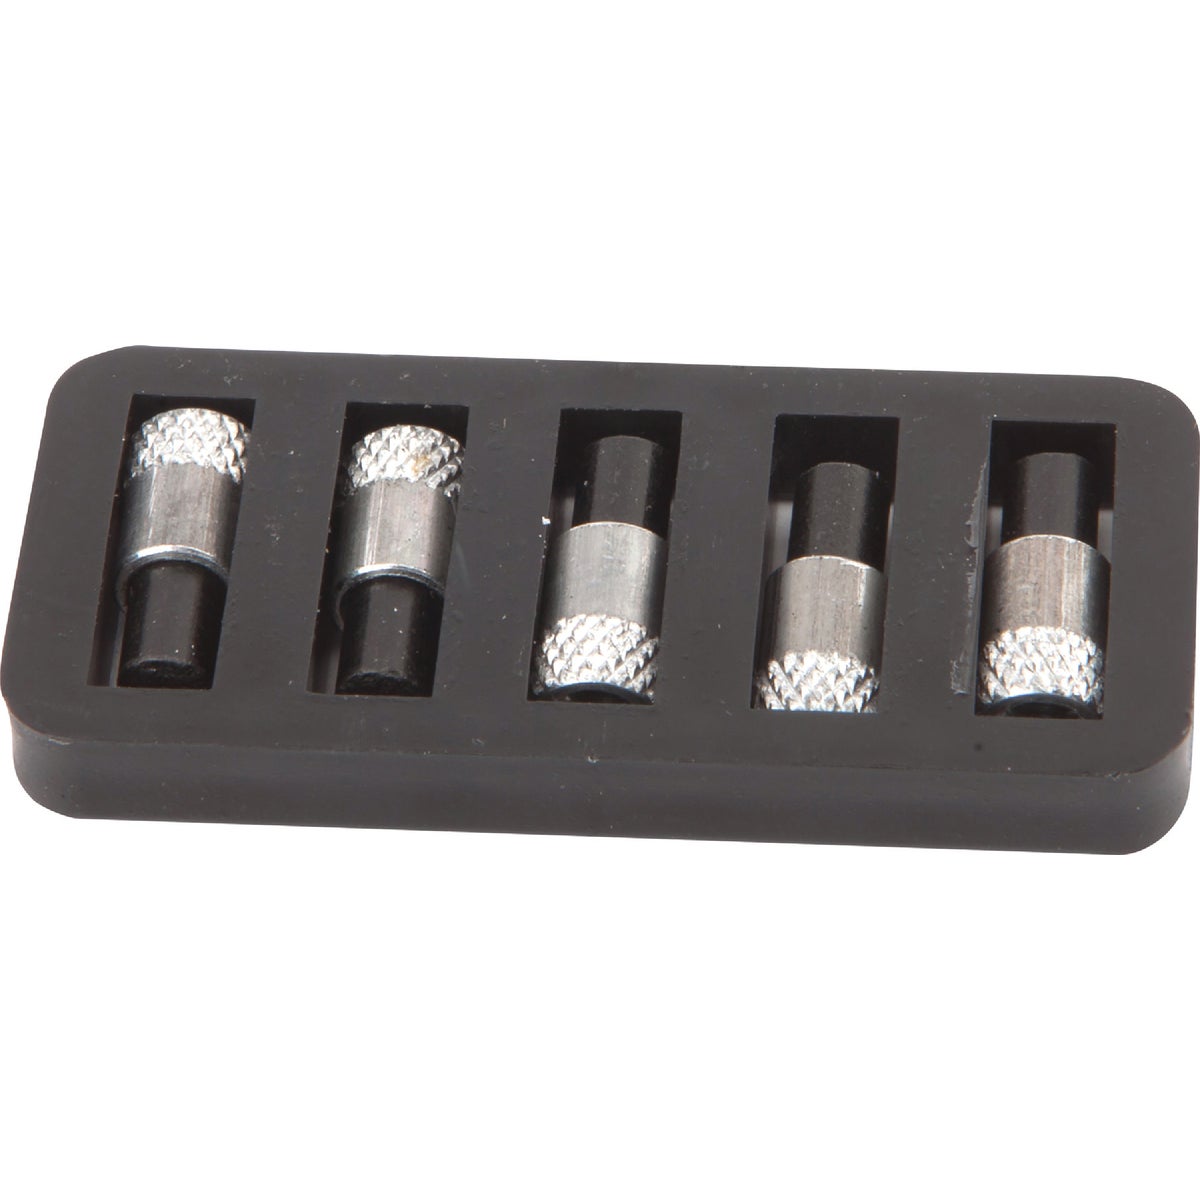 Item 394009, Fits all standard screw-on type lighters and Forney single flint lighter